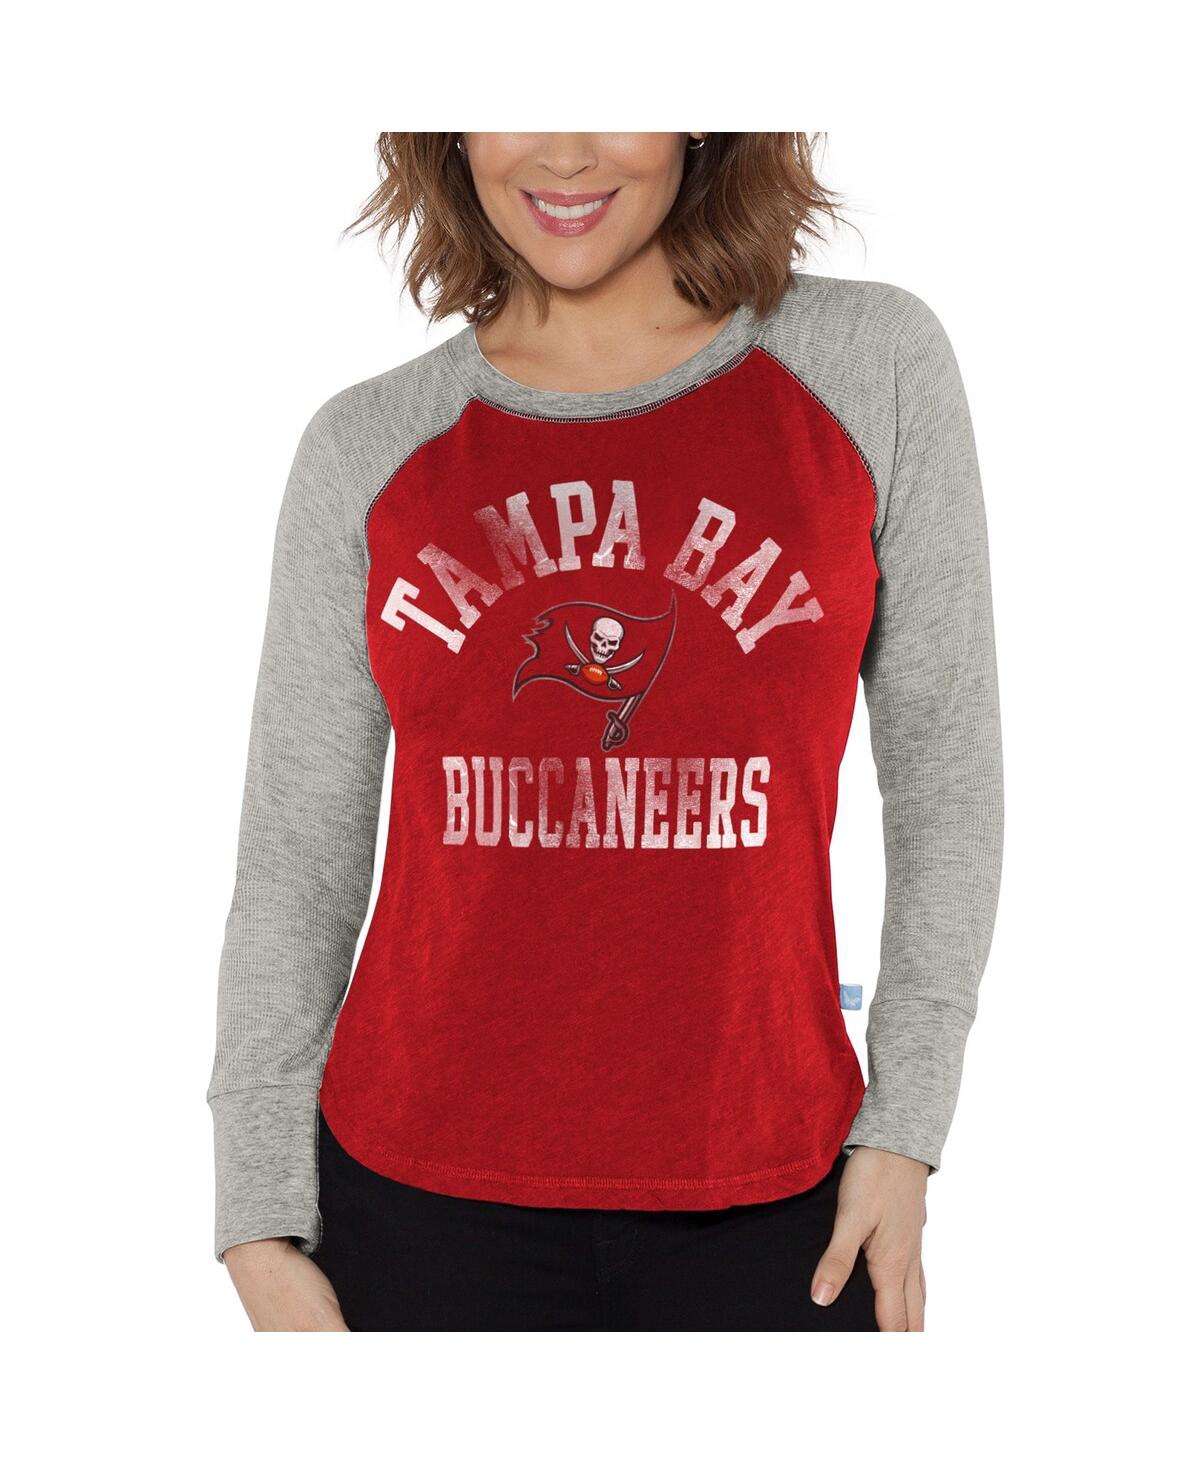 Women's G-iii 4Her by Carl Banks Red, Heather Gray Tampa Bay Buccaneers Waffle Knit Raglan Long Sleeve T-shirt - Red, Heather Gray